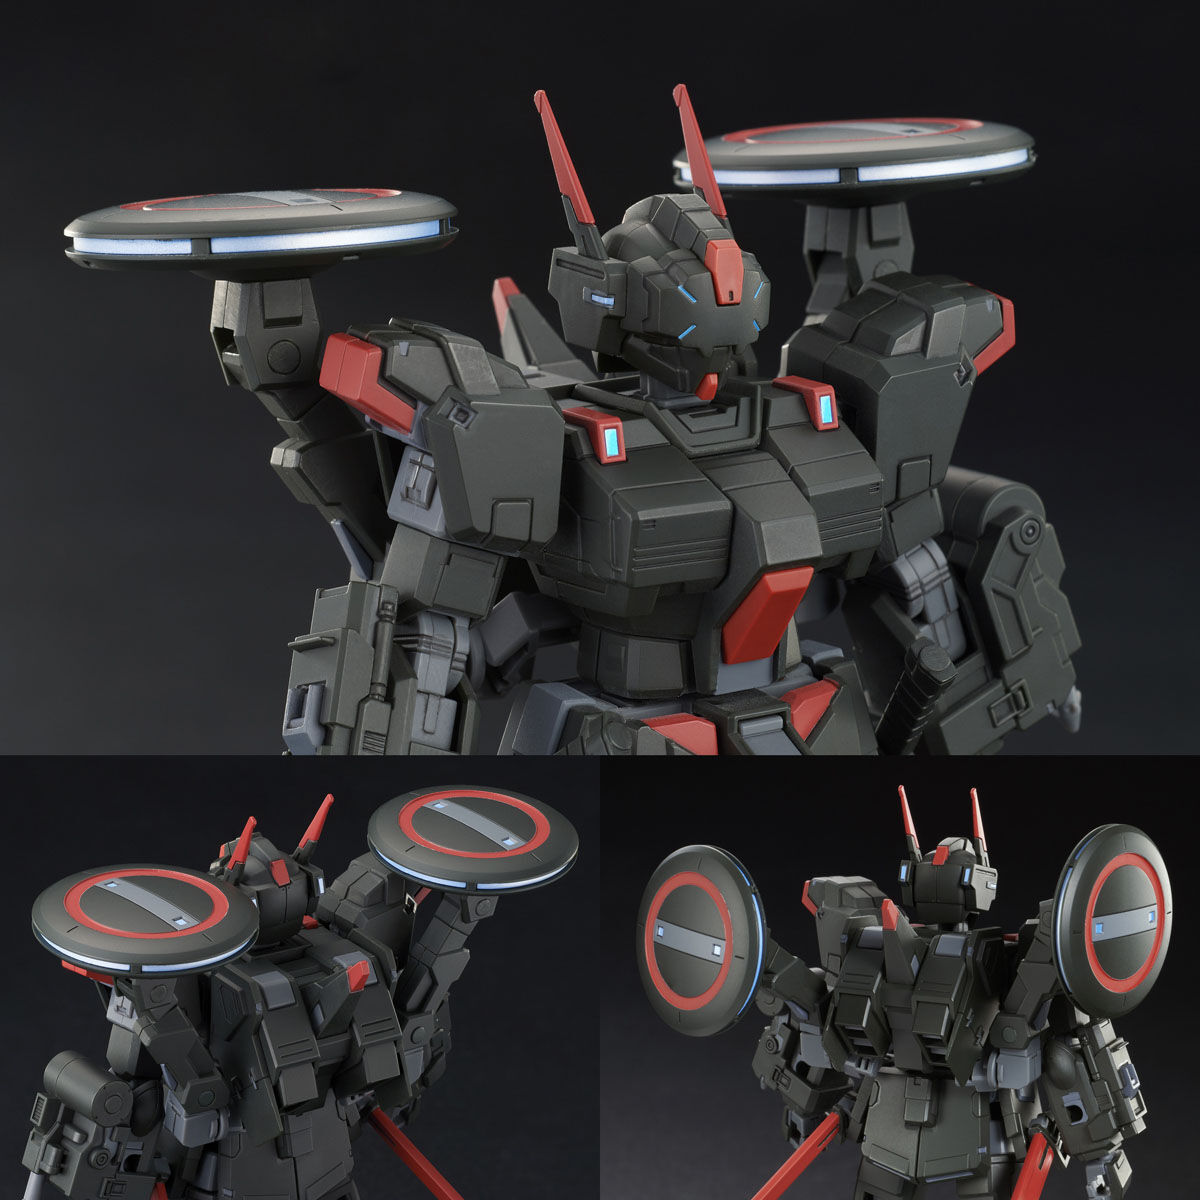 HG 1/144 BLACK RIDER [May 2022 Delivery]